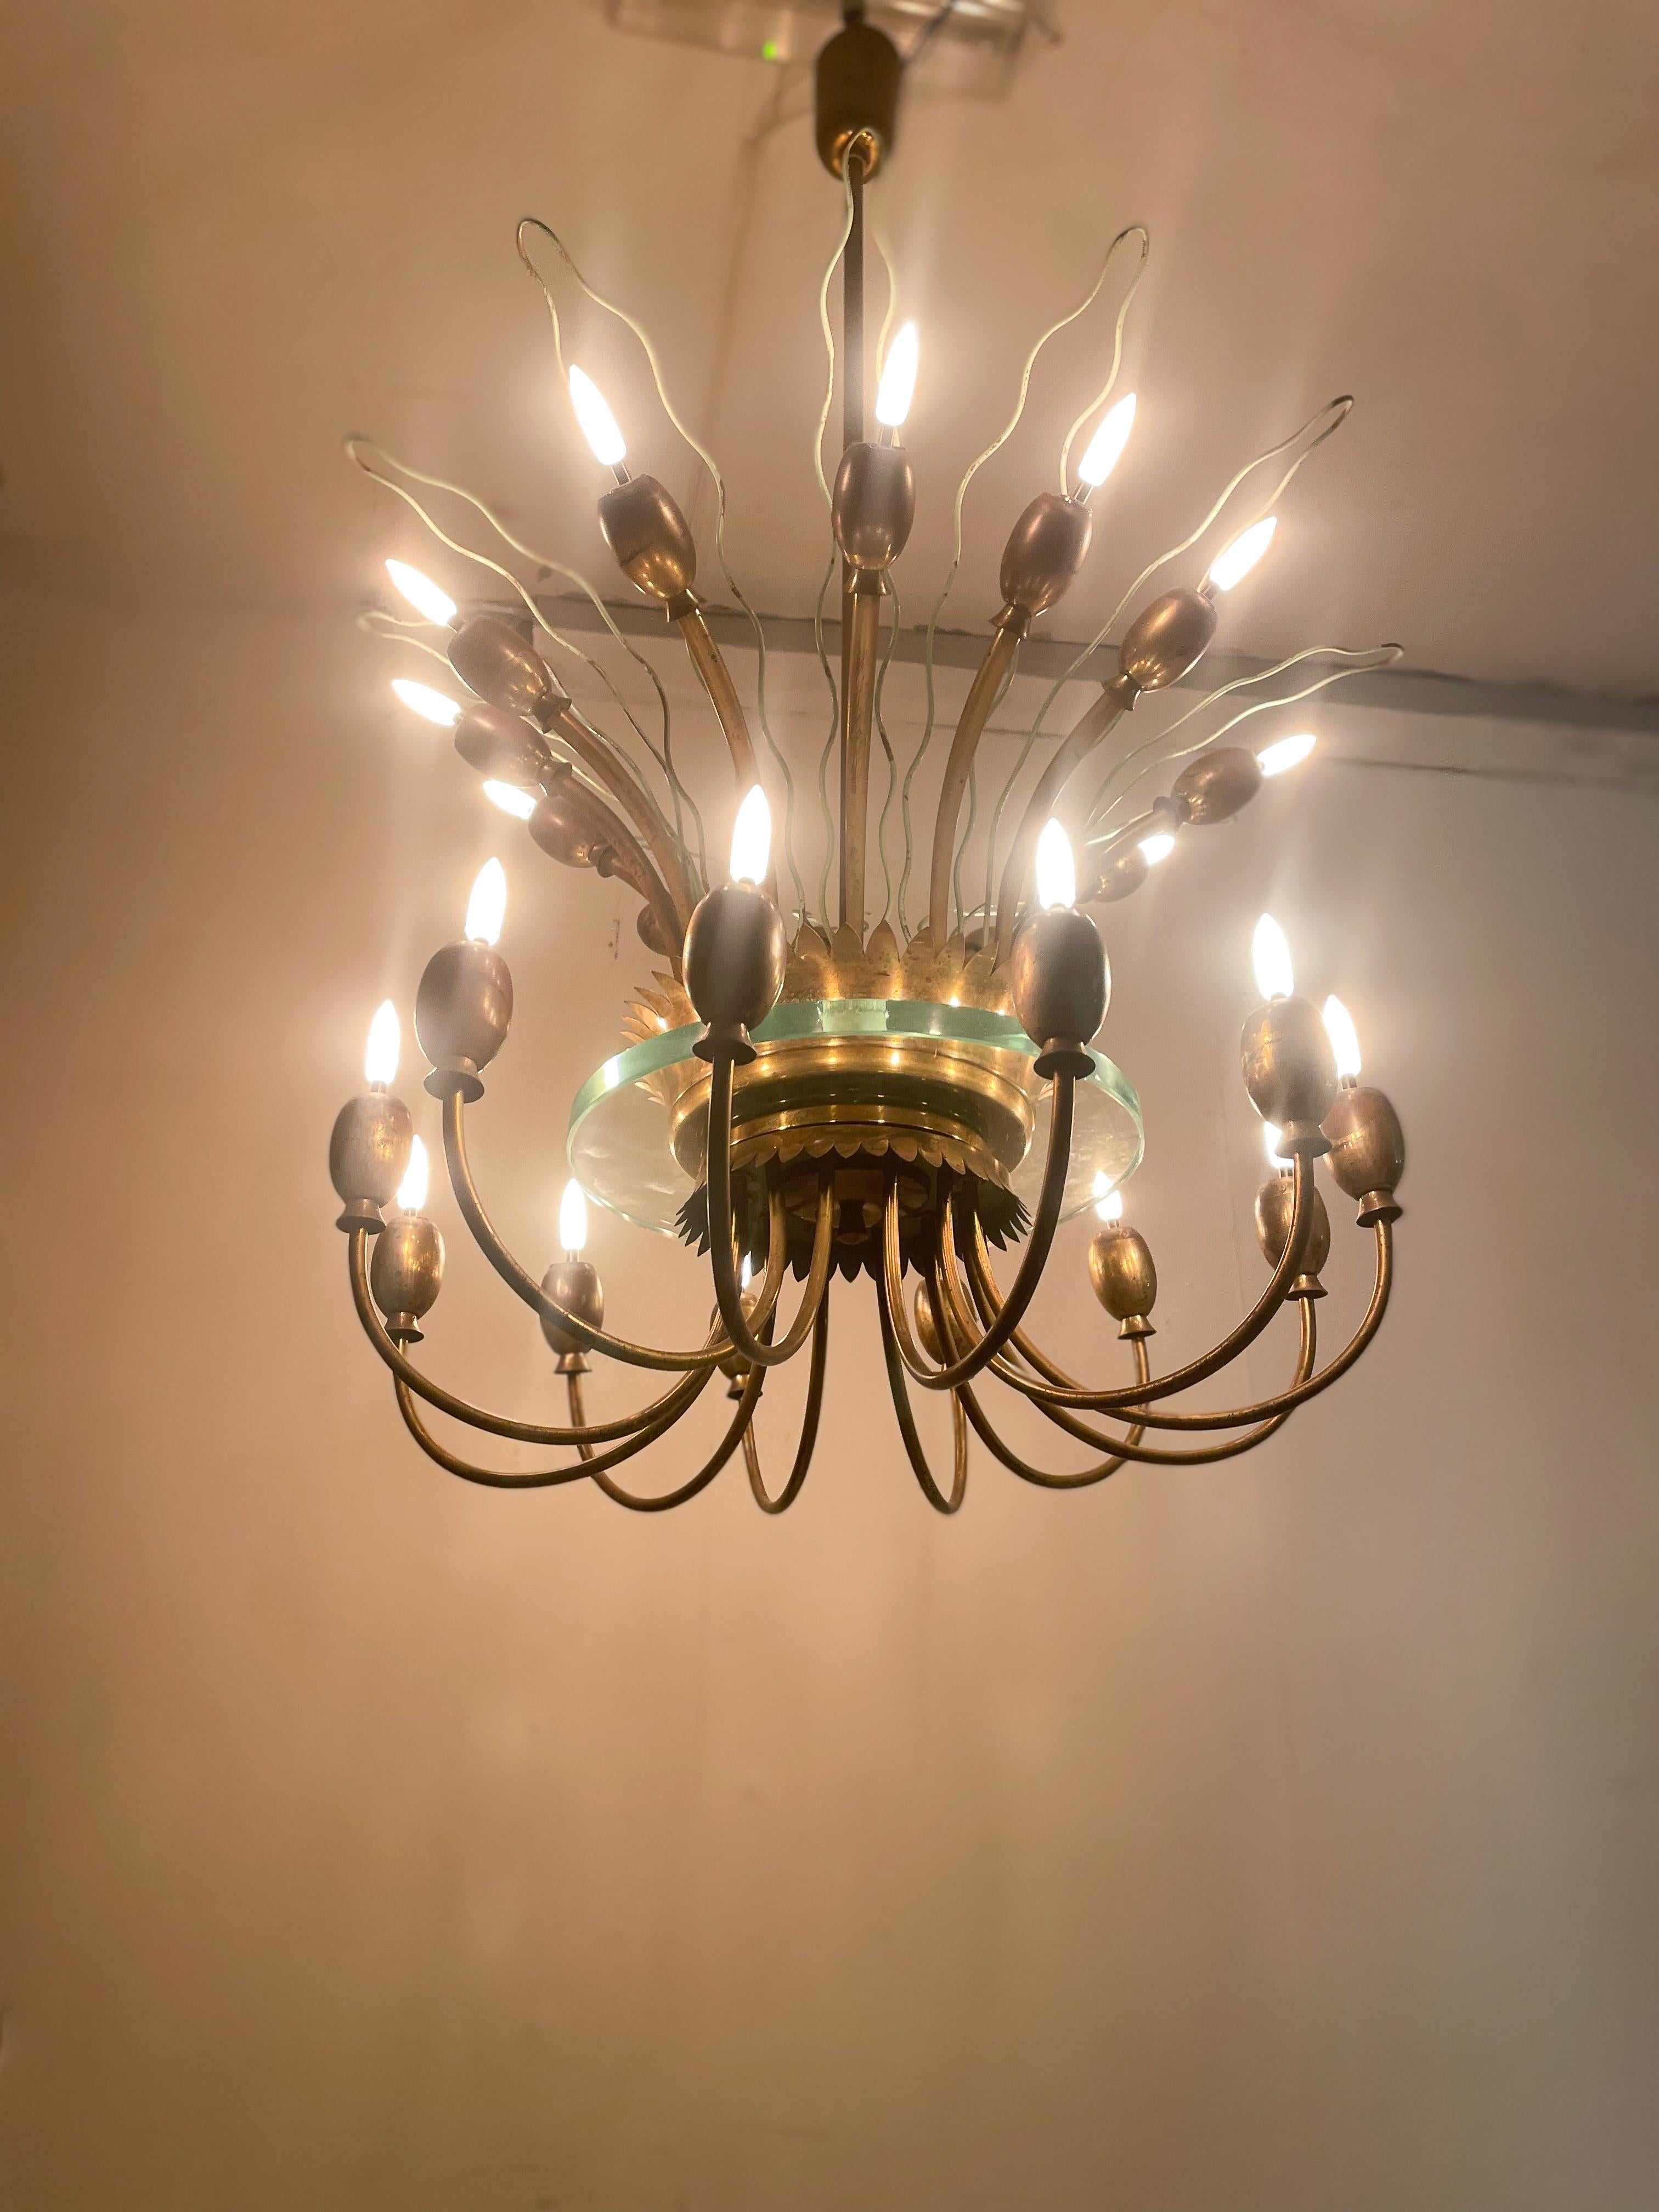 Mid-Century Modern Italian Chandelier, Metal Brass and Glass, Italy, 1950s For Sale 2